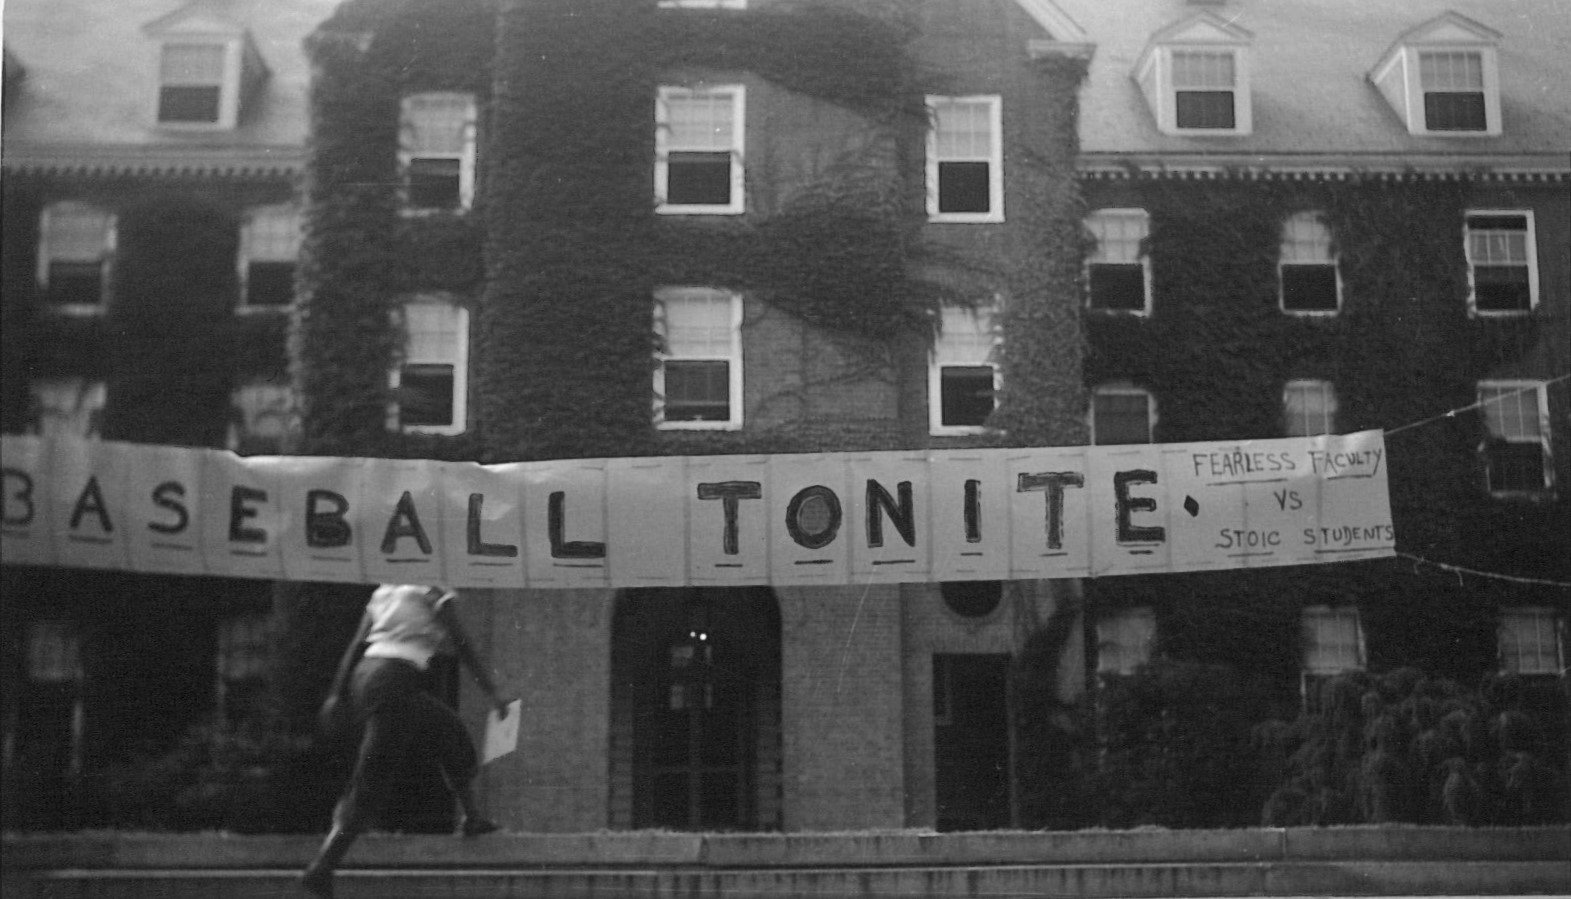 Black and white photo of a banner proclaiming "Baseball tonight" across a brick building.